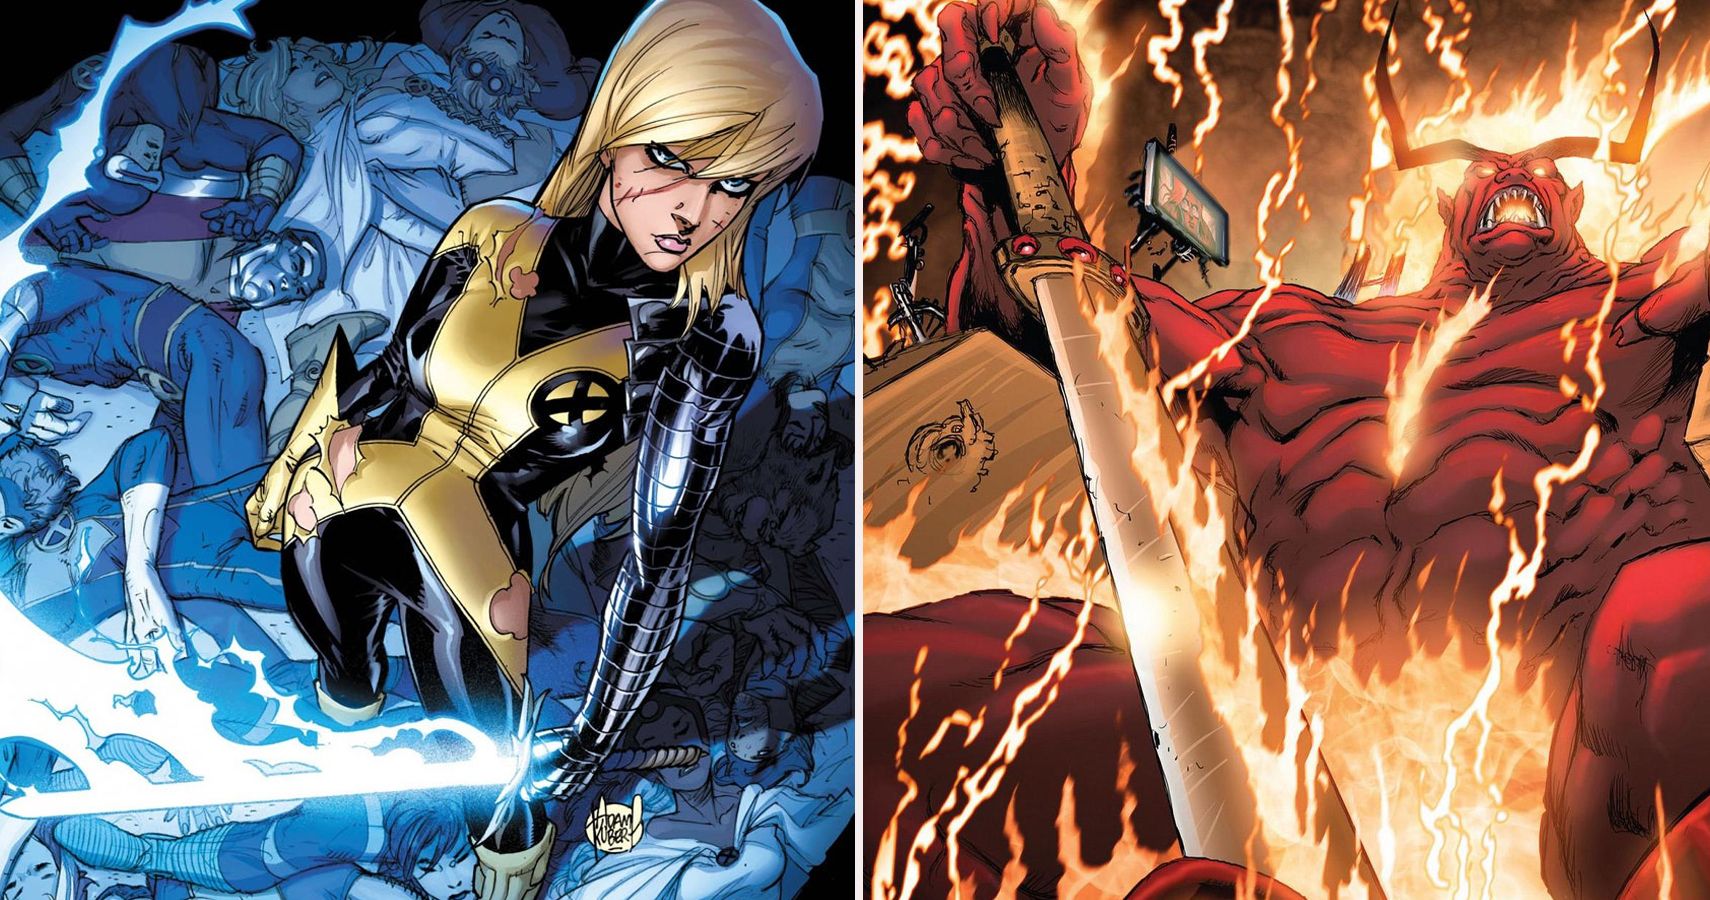 A split image of Magik and Surtur the fire giant from marvel comics